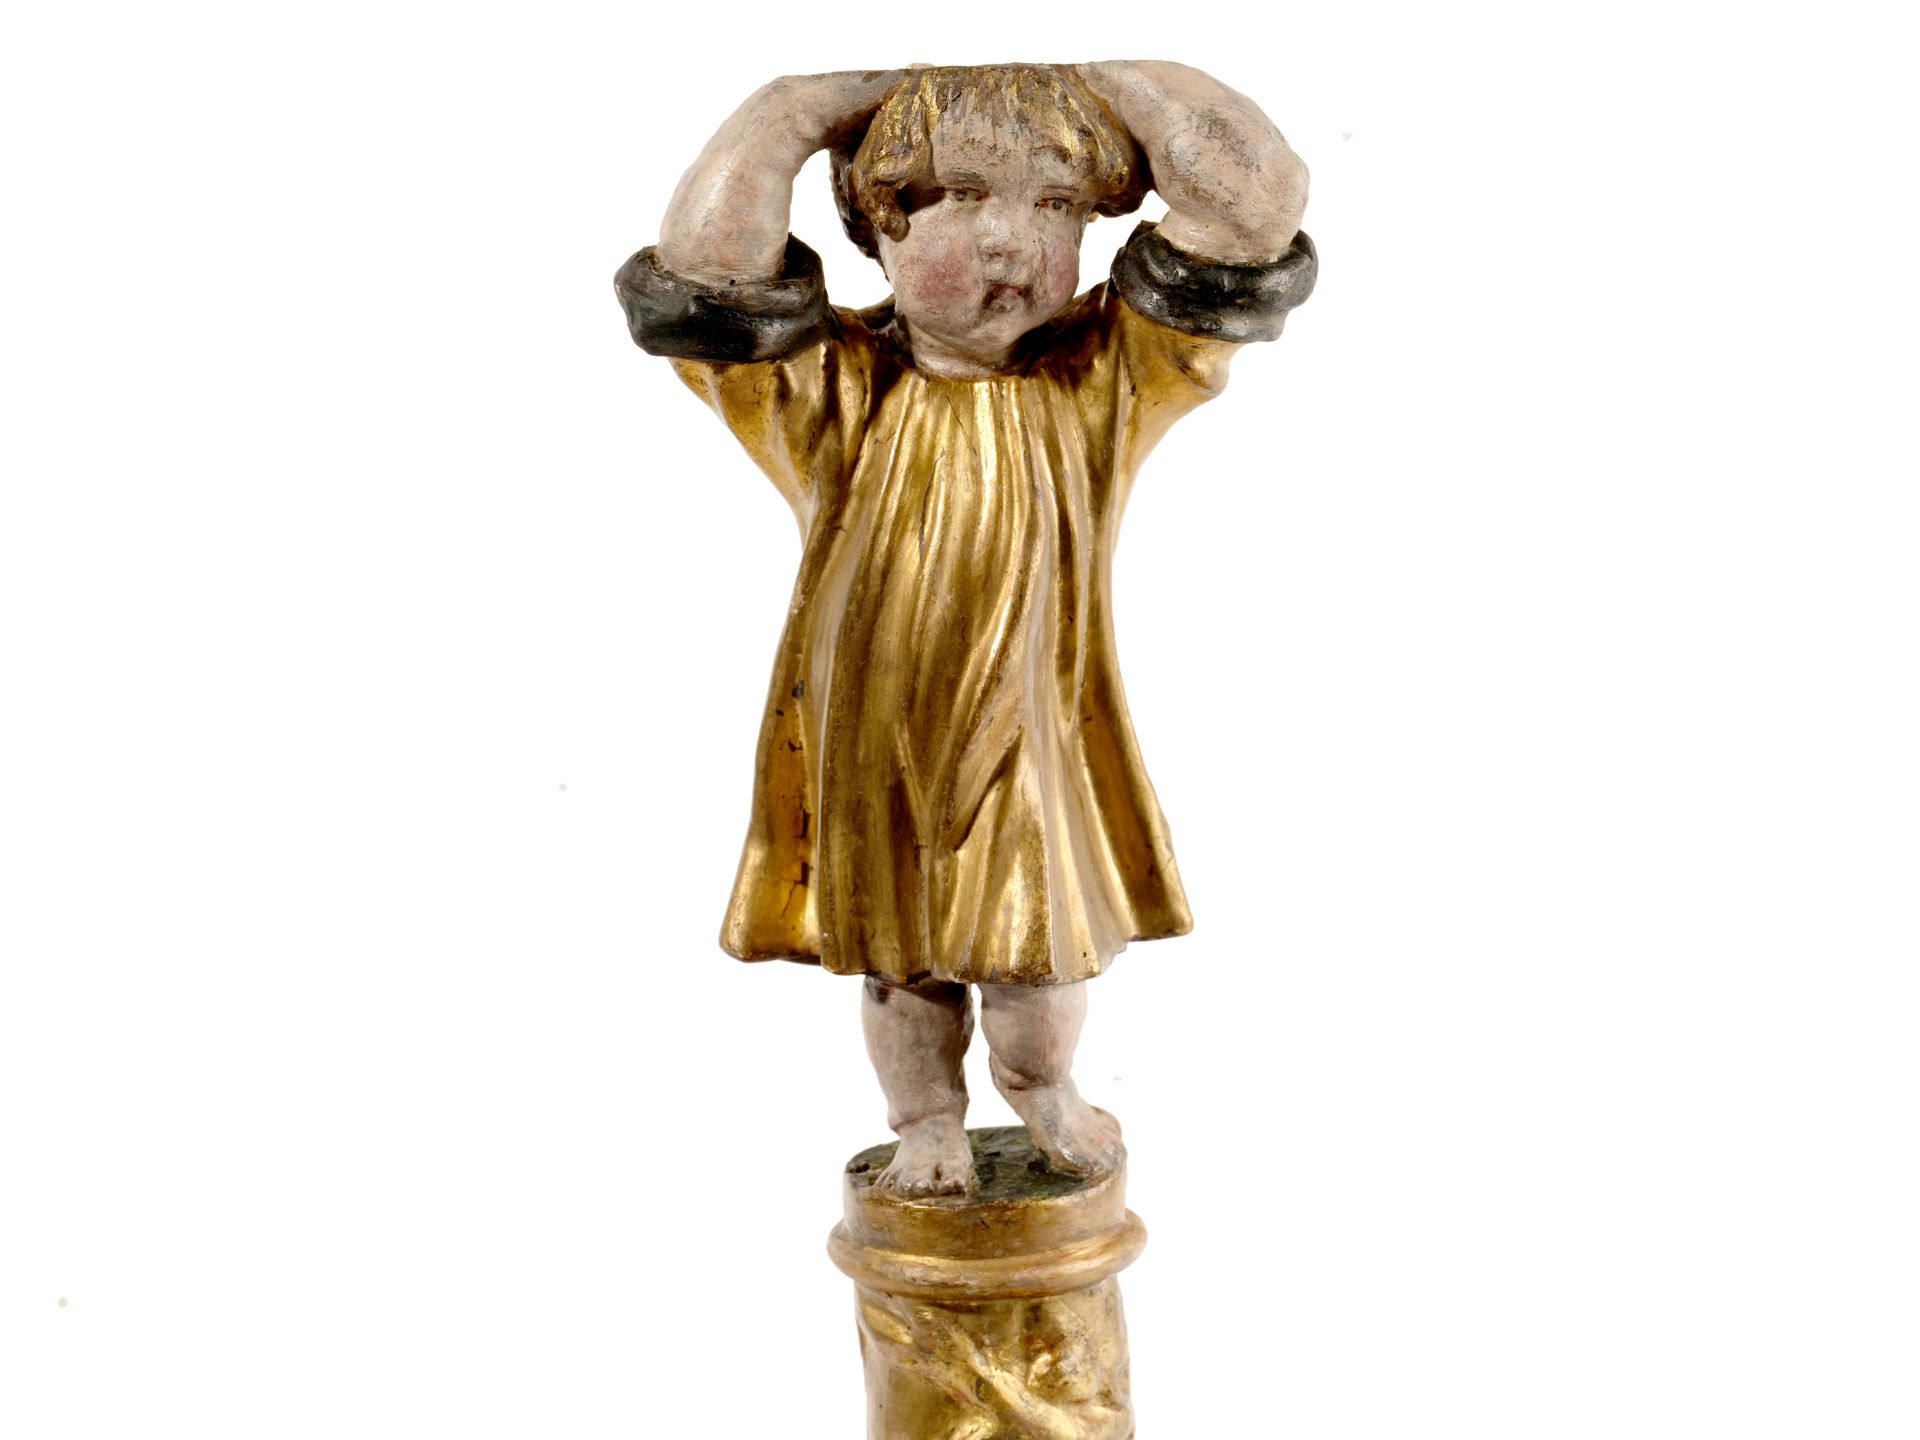 Christ child standing on a column, Southern Europe, Spain/Italy, 17th century - Image 11 of 14